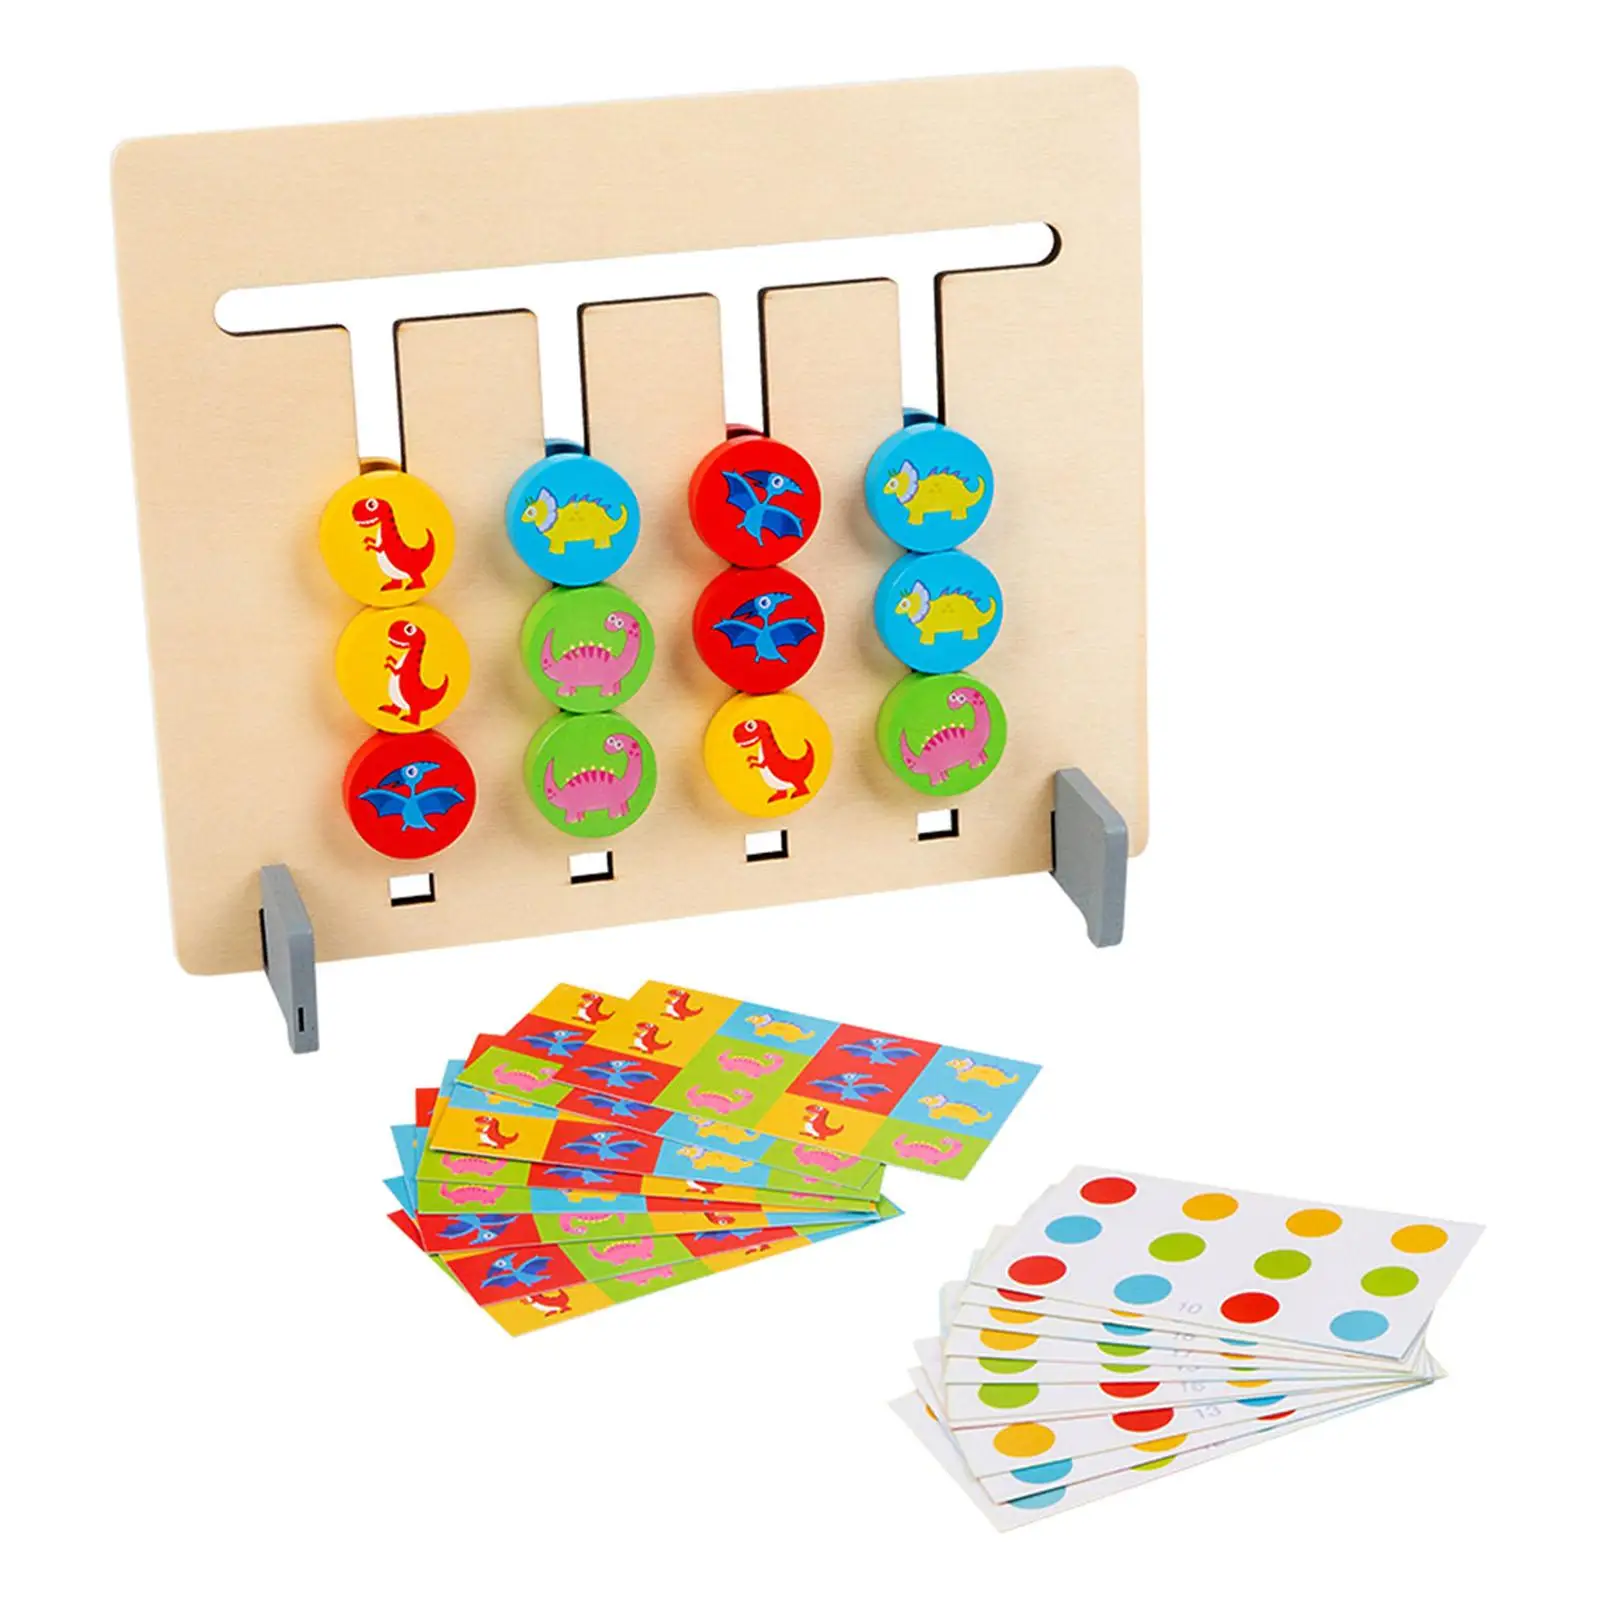 Slide Puzzle Toy Game Developing Educational Toy Wooden Board Shape Color Matching Toy Brain Teaser Jigsaw for Preschool